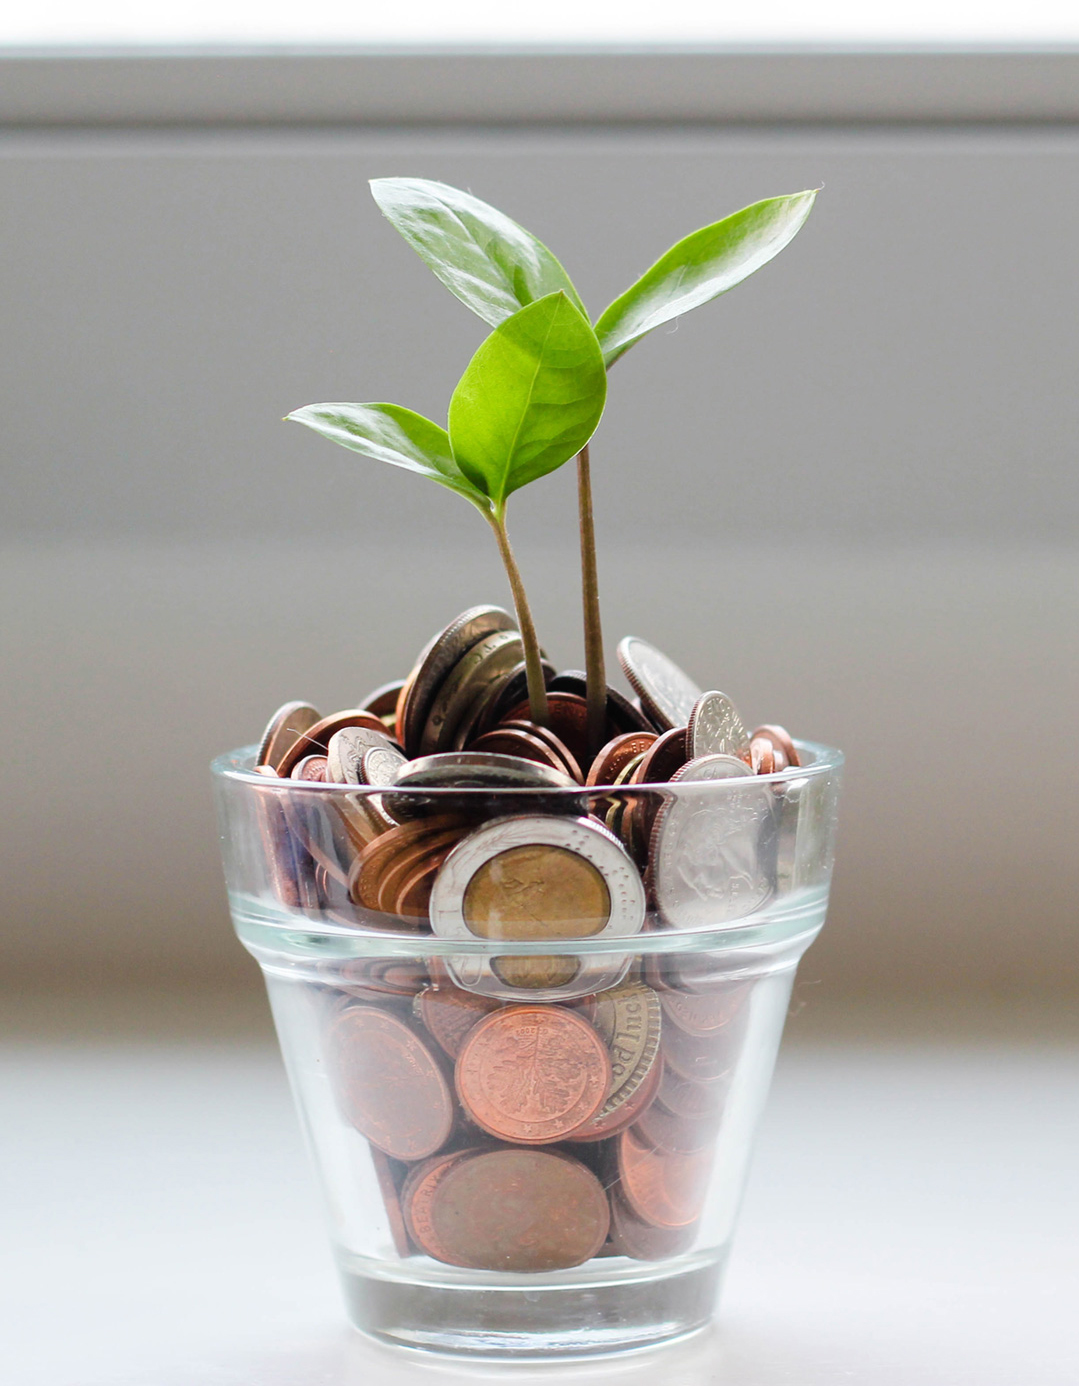 A small plant grows on a pot filled with coins through financial planning.